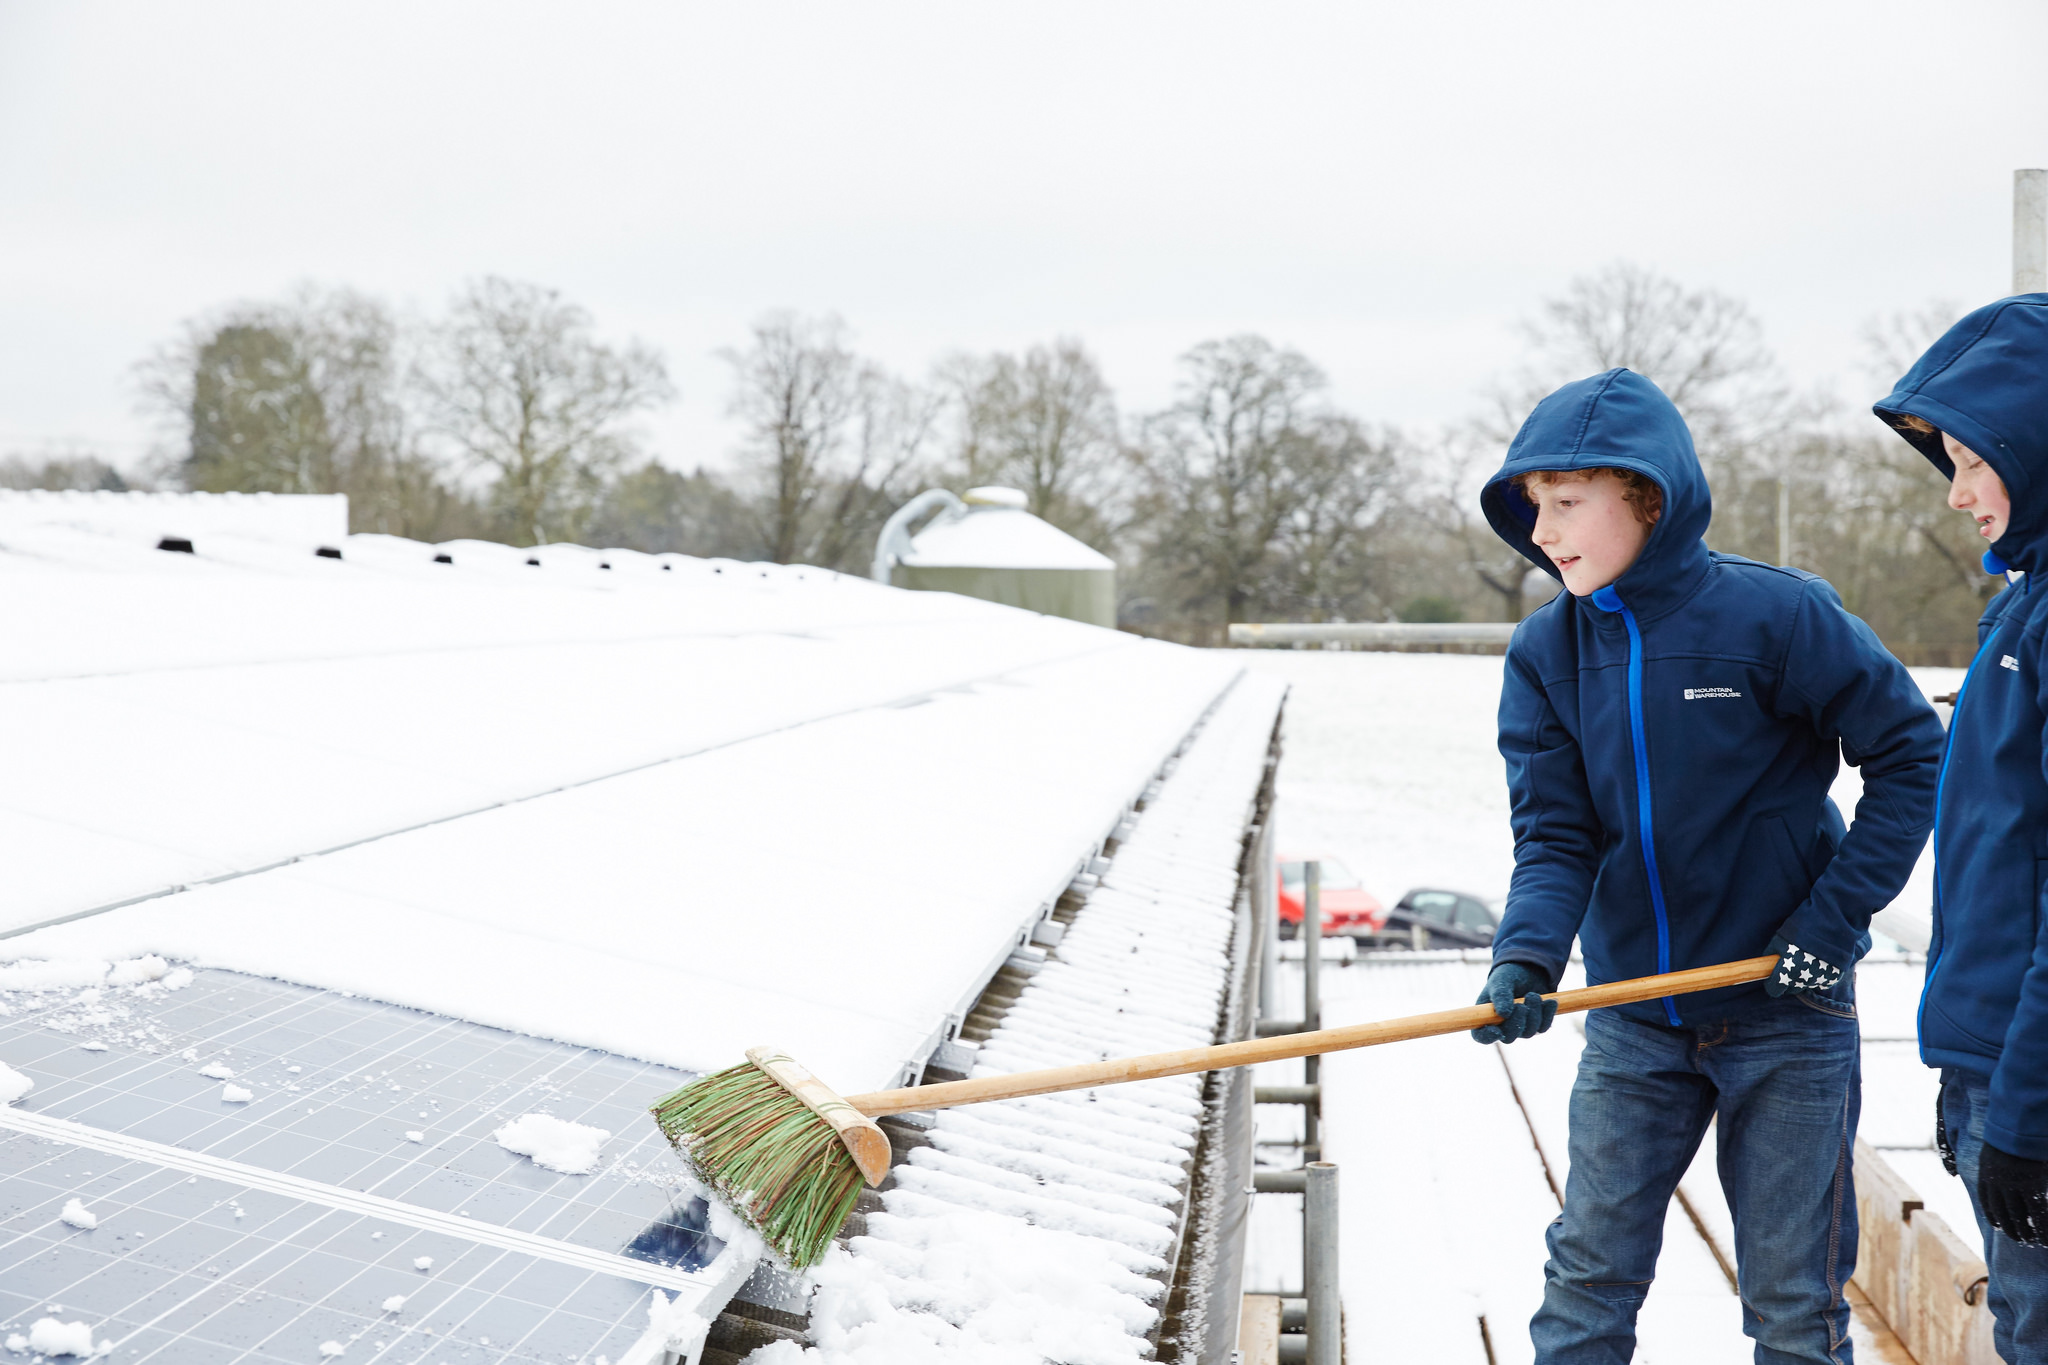 It’s Snowing on My Solar Panels – Now What?